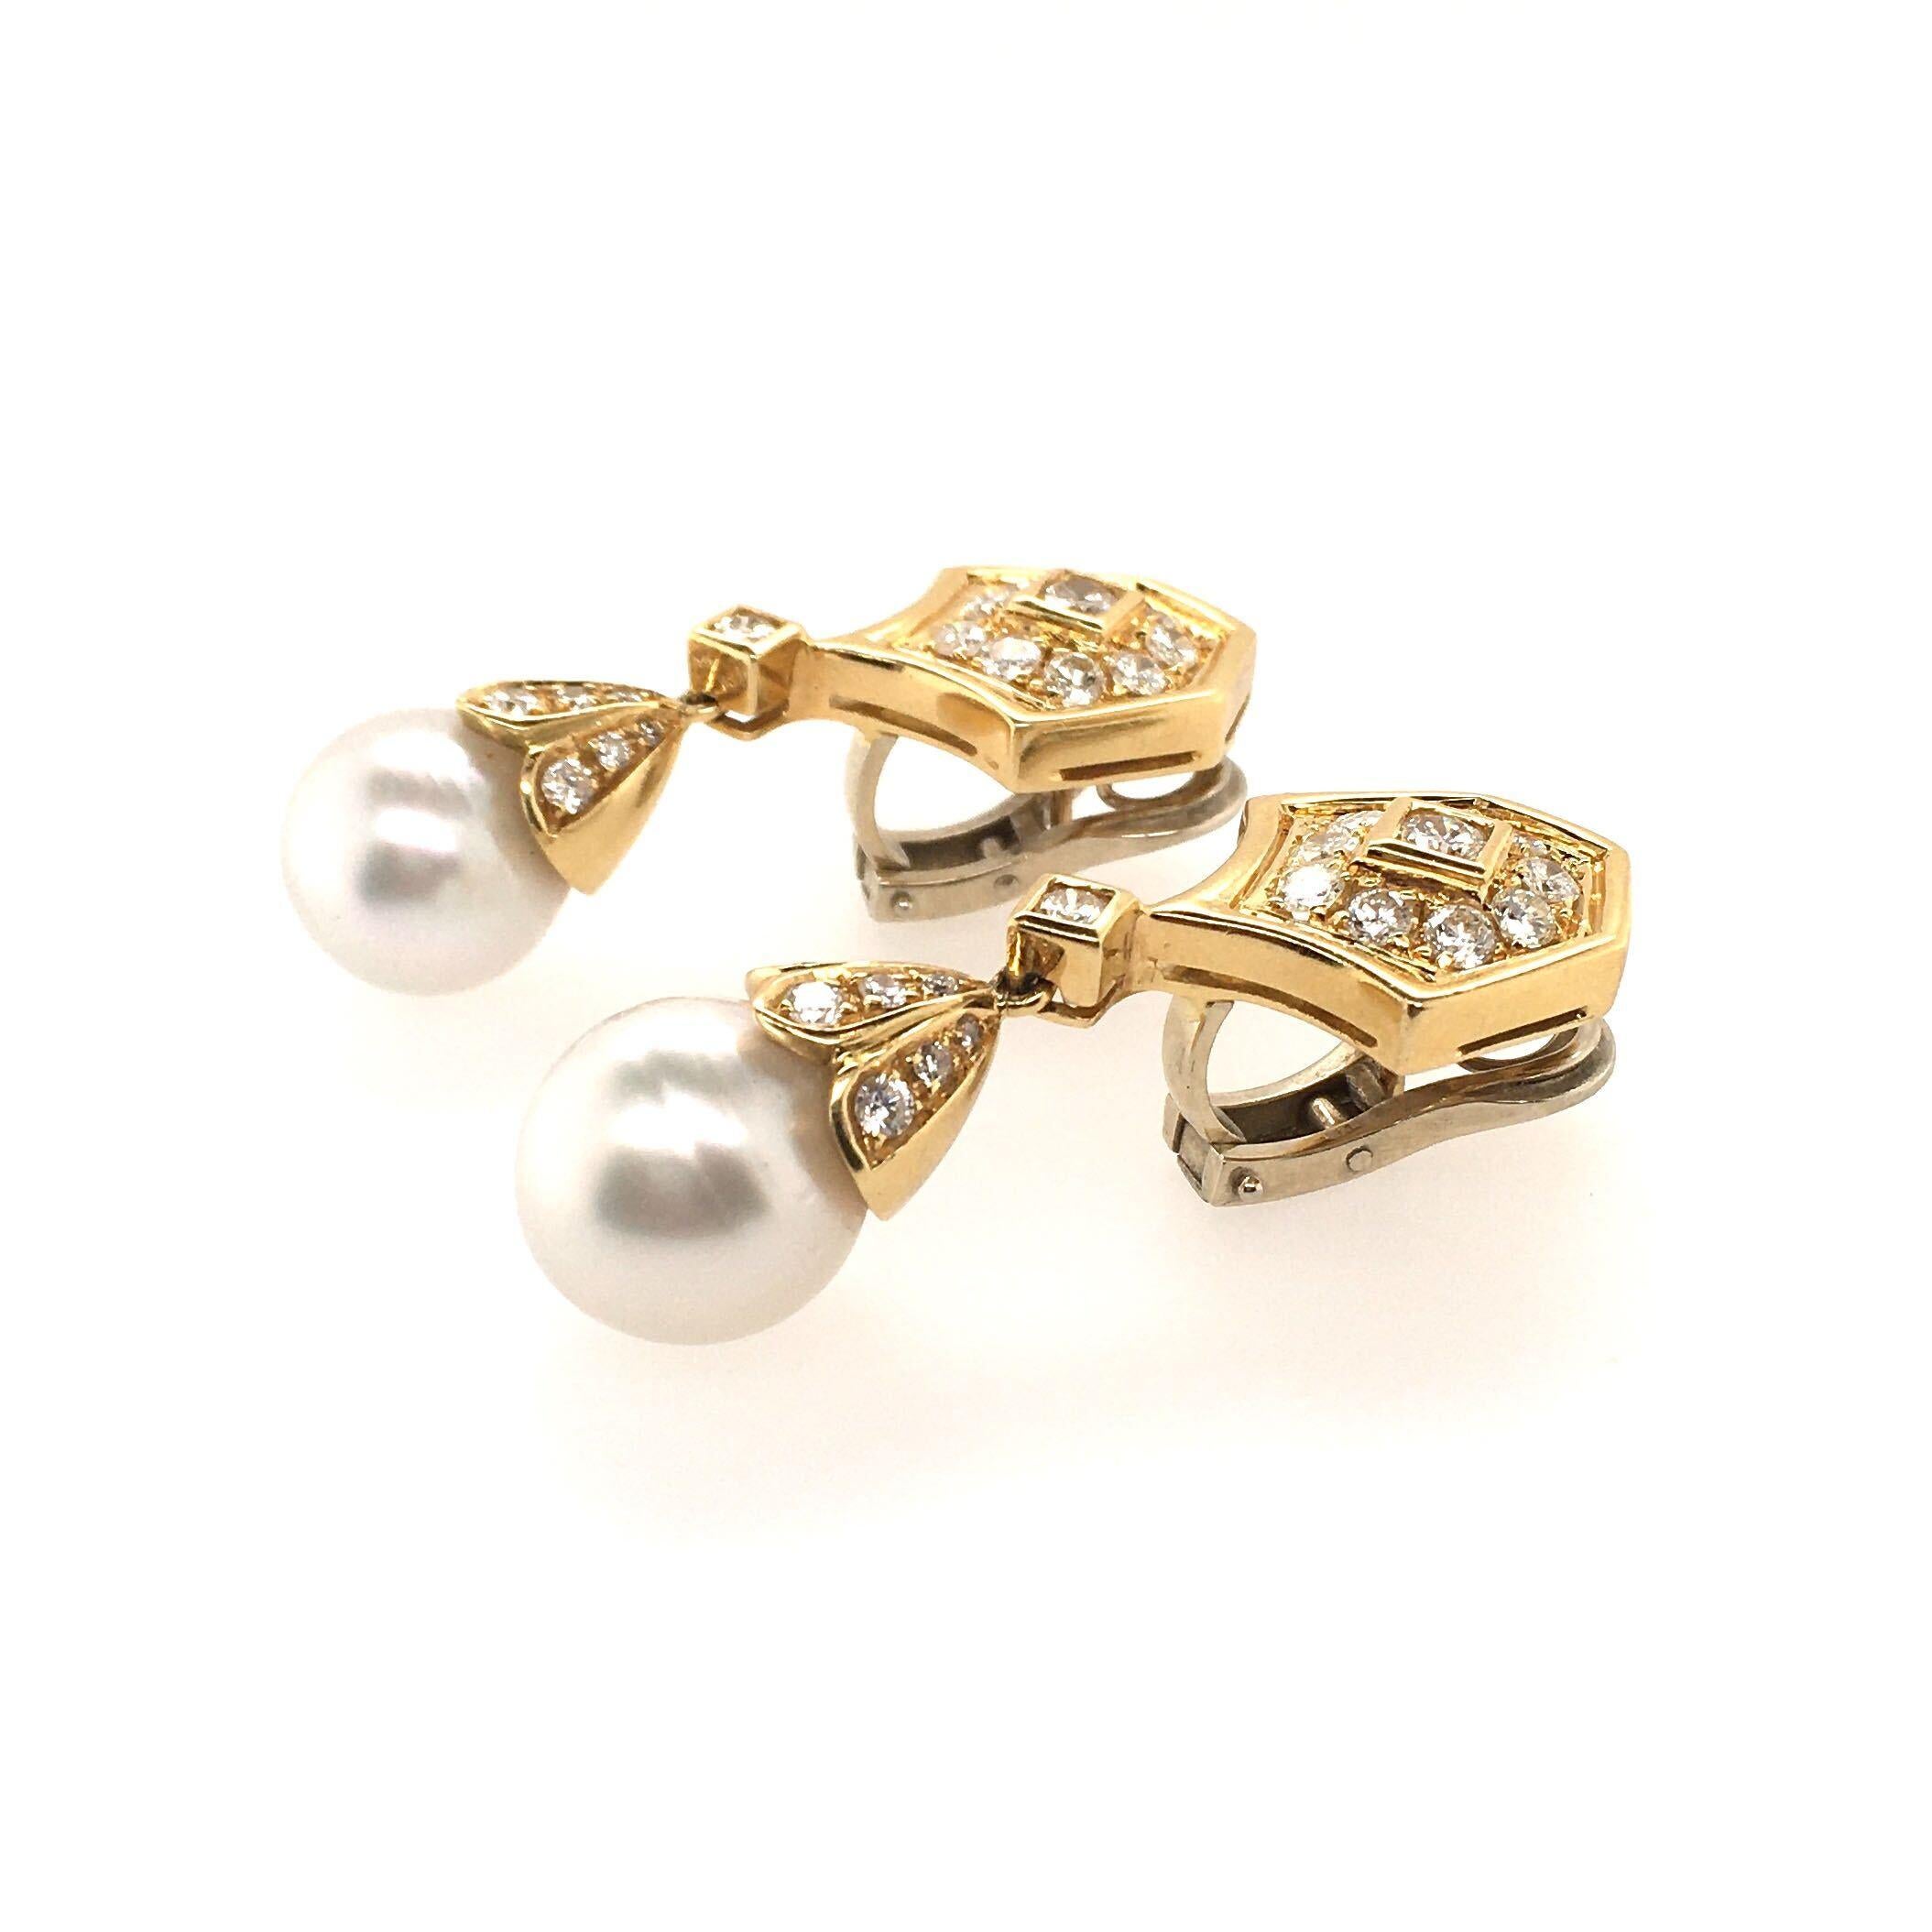 A pair of 18 karat yellow gold, diamond and pearl earrings. Designed as a shield shape set with circular cut diamonds, suspending a drop shaped pearl, measuring approximately 12.4 and 12.6mm, from a pave set diamond cap. Forty (40 ) diamonds weigh